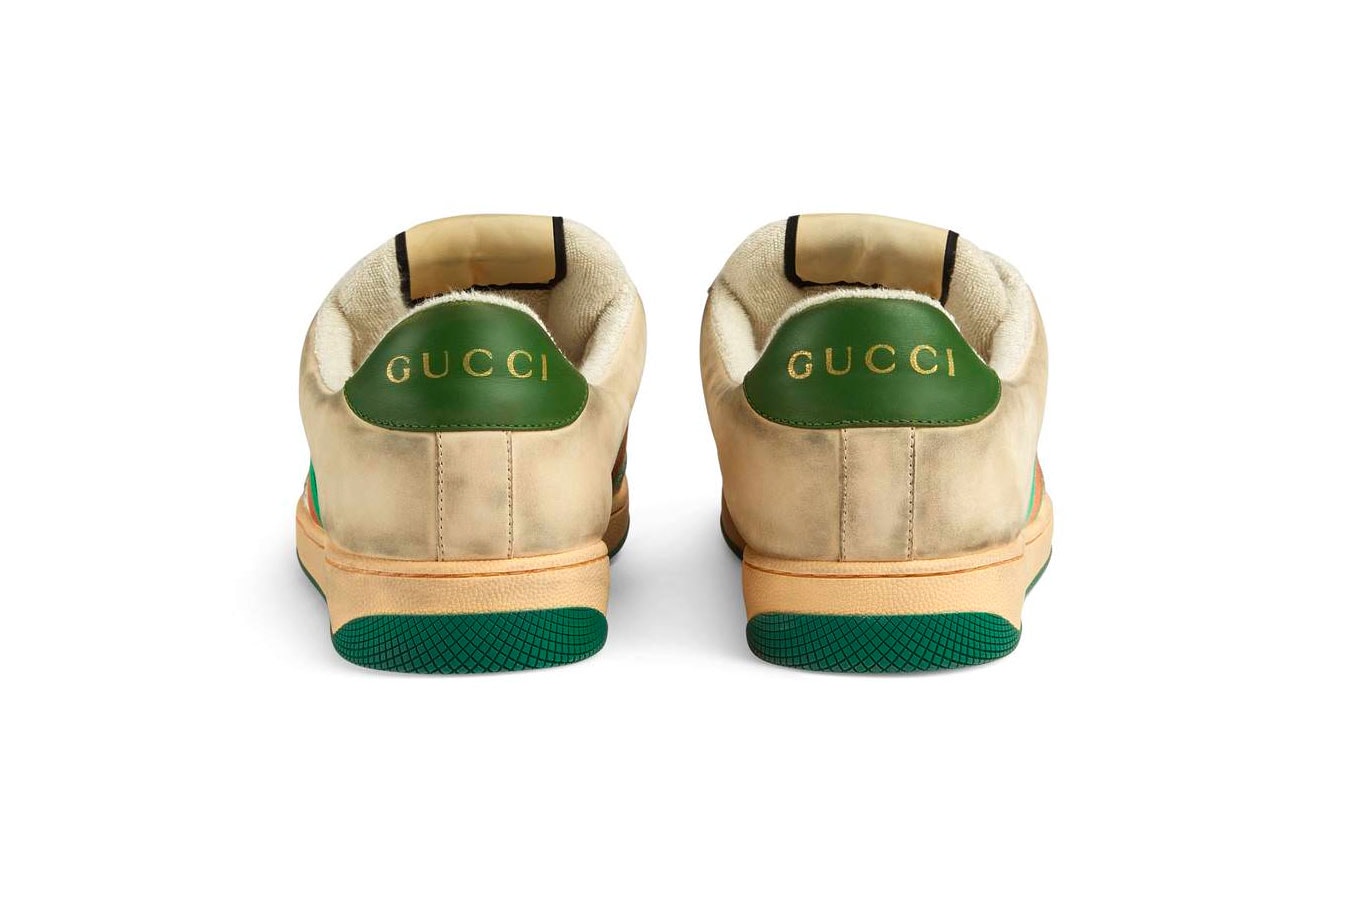 Get the Ultimate Gucci Look with Our Premium Replicas: Shop the